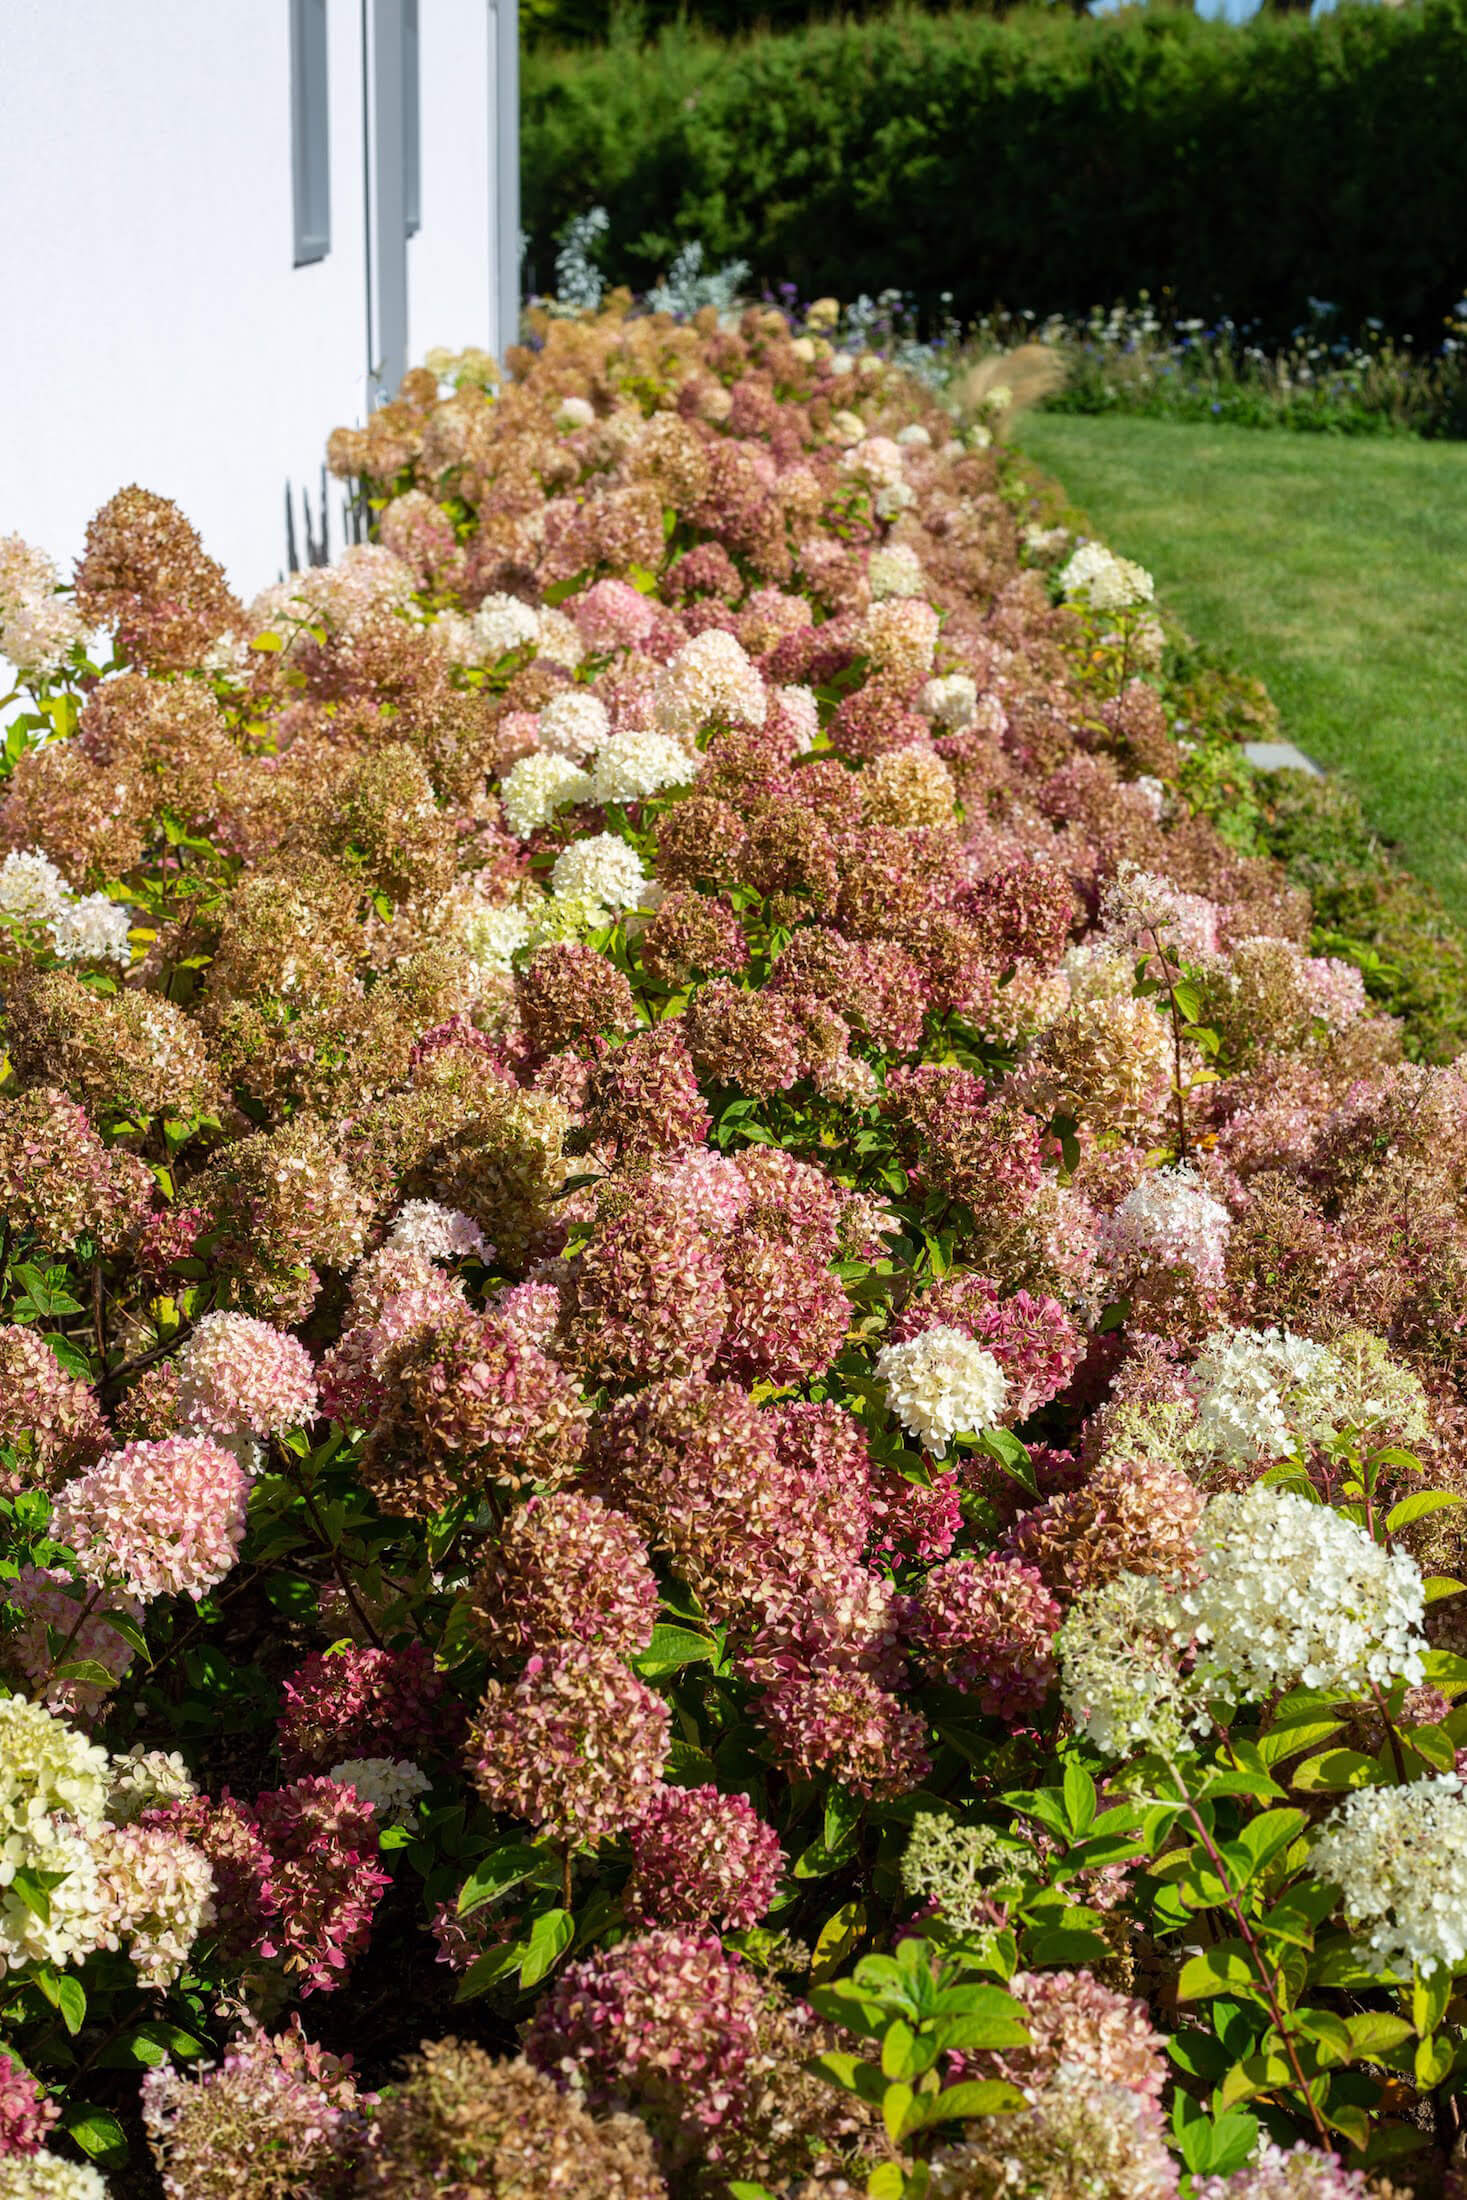 September Hydrangeas changing colour to reds